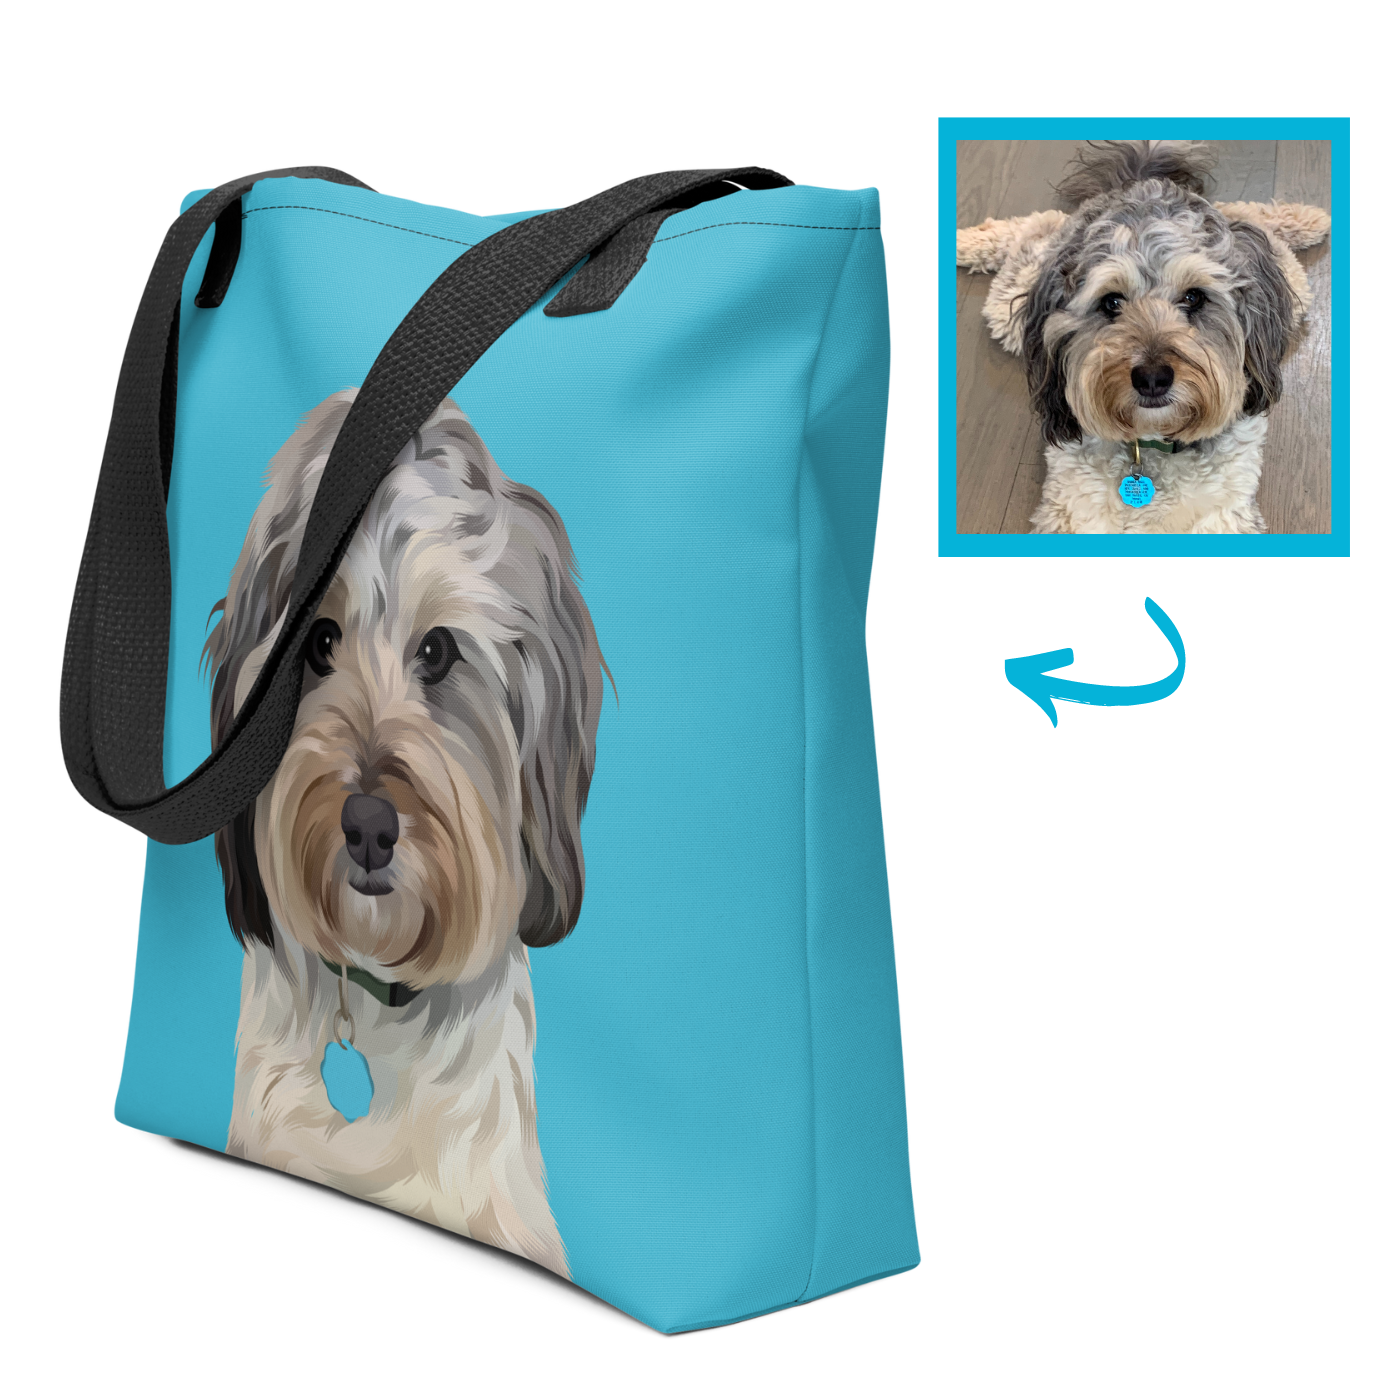 Our Custom Dog Tote Bags and Custom Cat Tote Bags are the best gifts for dog lovers and cat lovers! We take a pet's photo, create a custom pet portrait, and create a cherry and fun tote one-of a kind tote bag. 